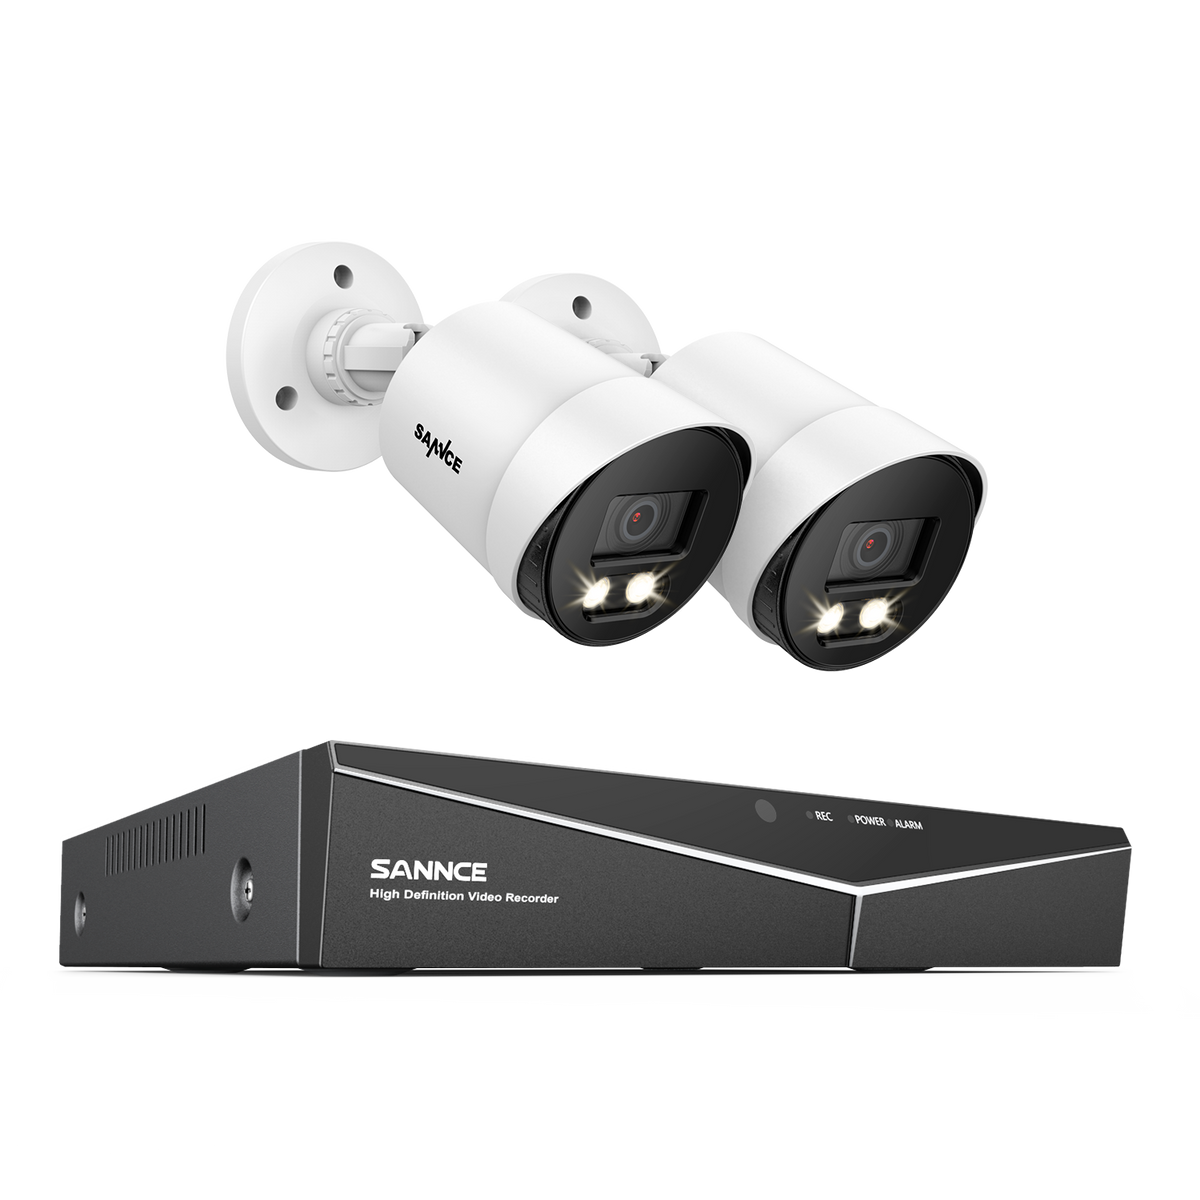 8 Channel 1080P Full-Color Security Camera System - Hybrid DVR, 2PCS Warm-Light Cameras, Outdoor & Indoor, Smart Motion Detection, Remote Access